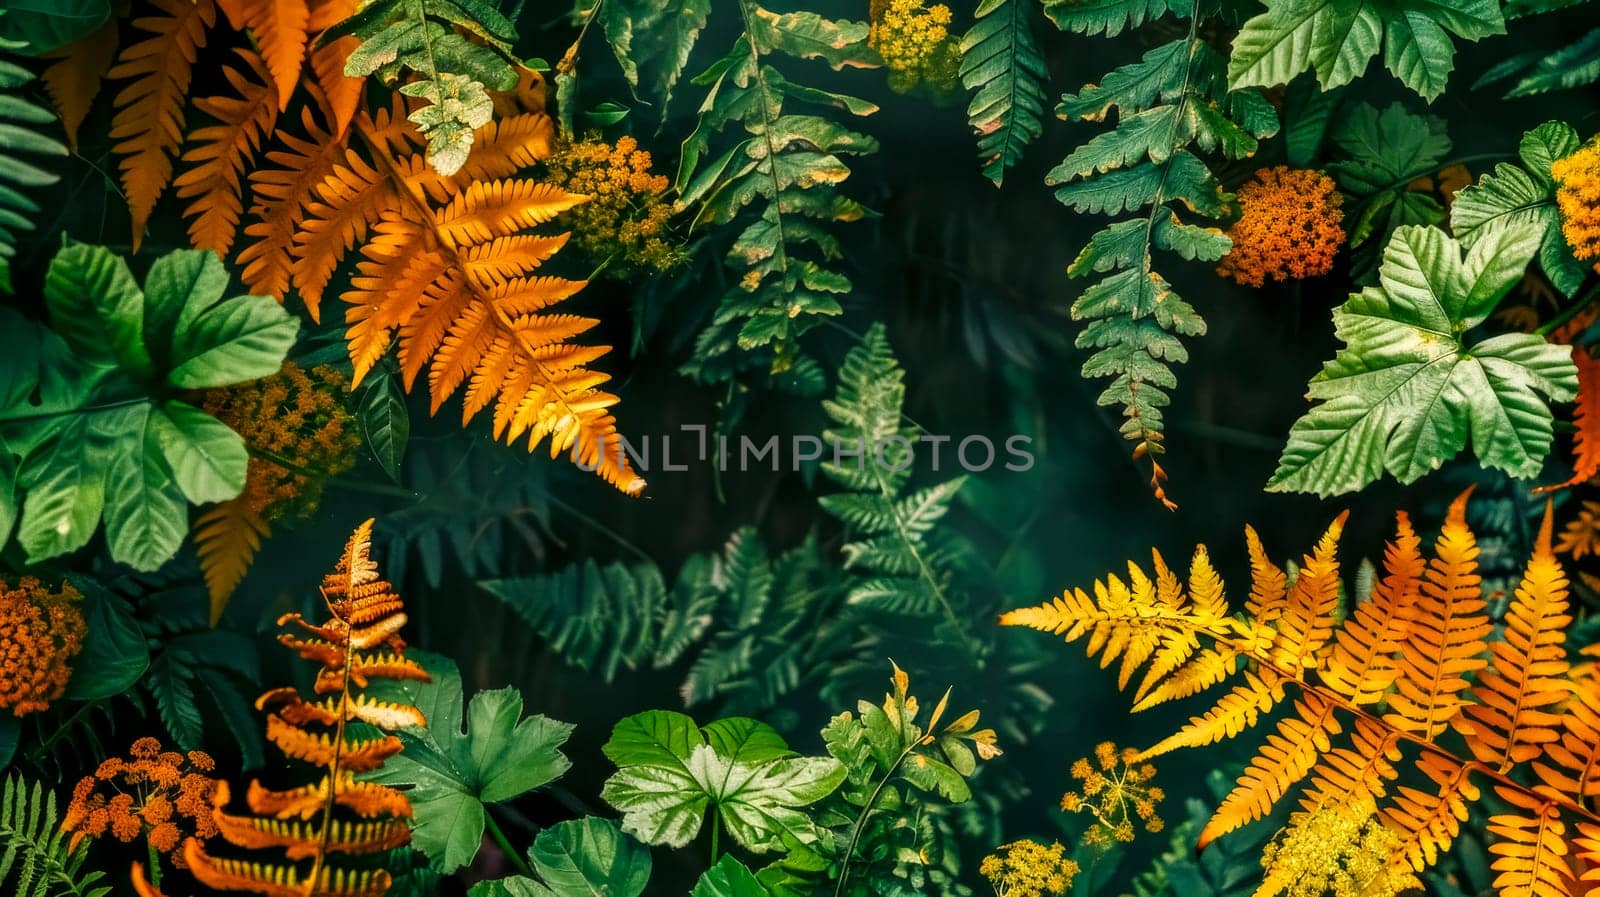 Vibrant tropical ferns and foliage background by Edophoto